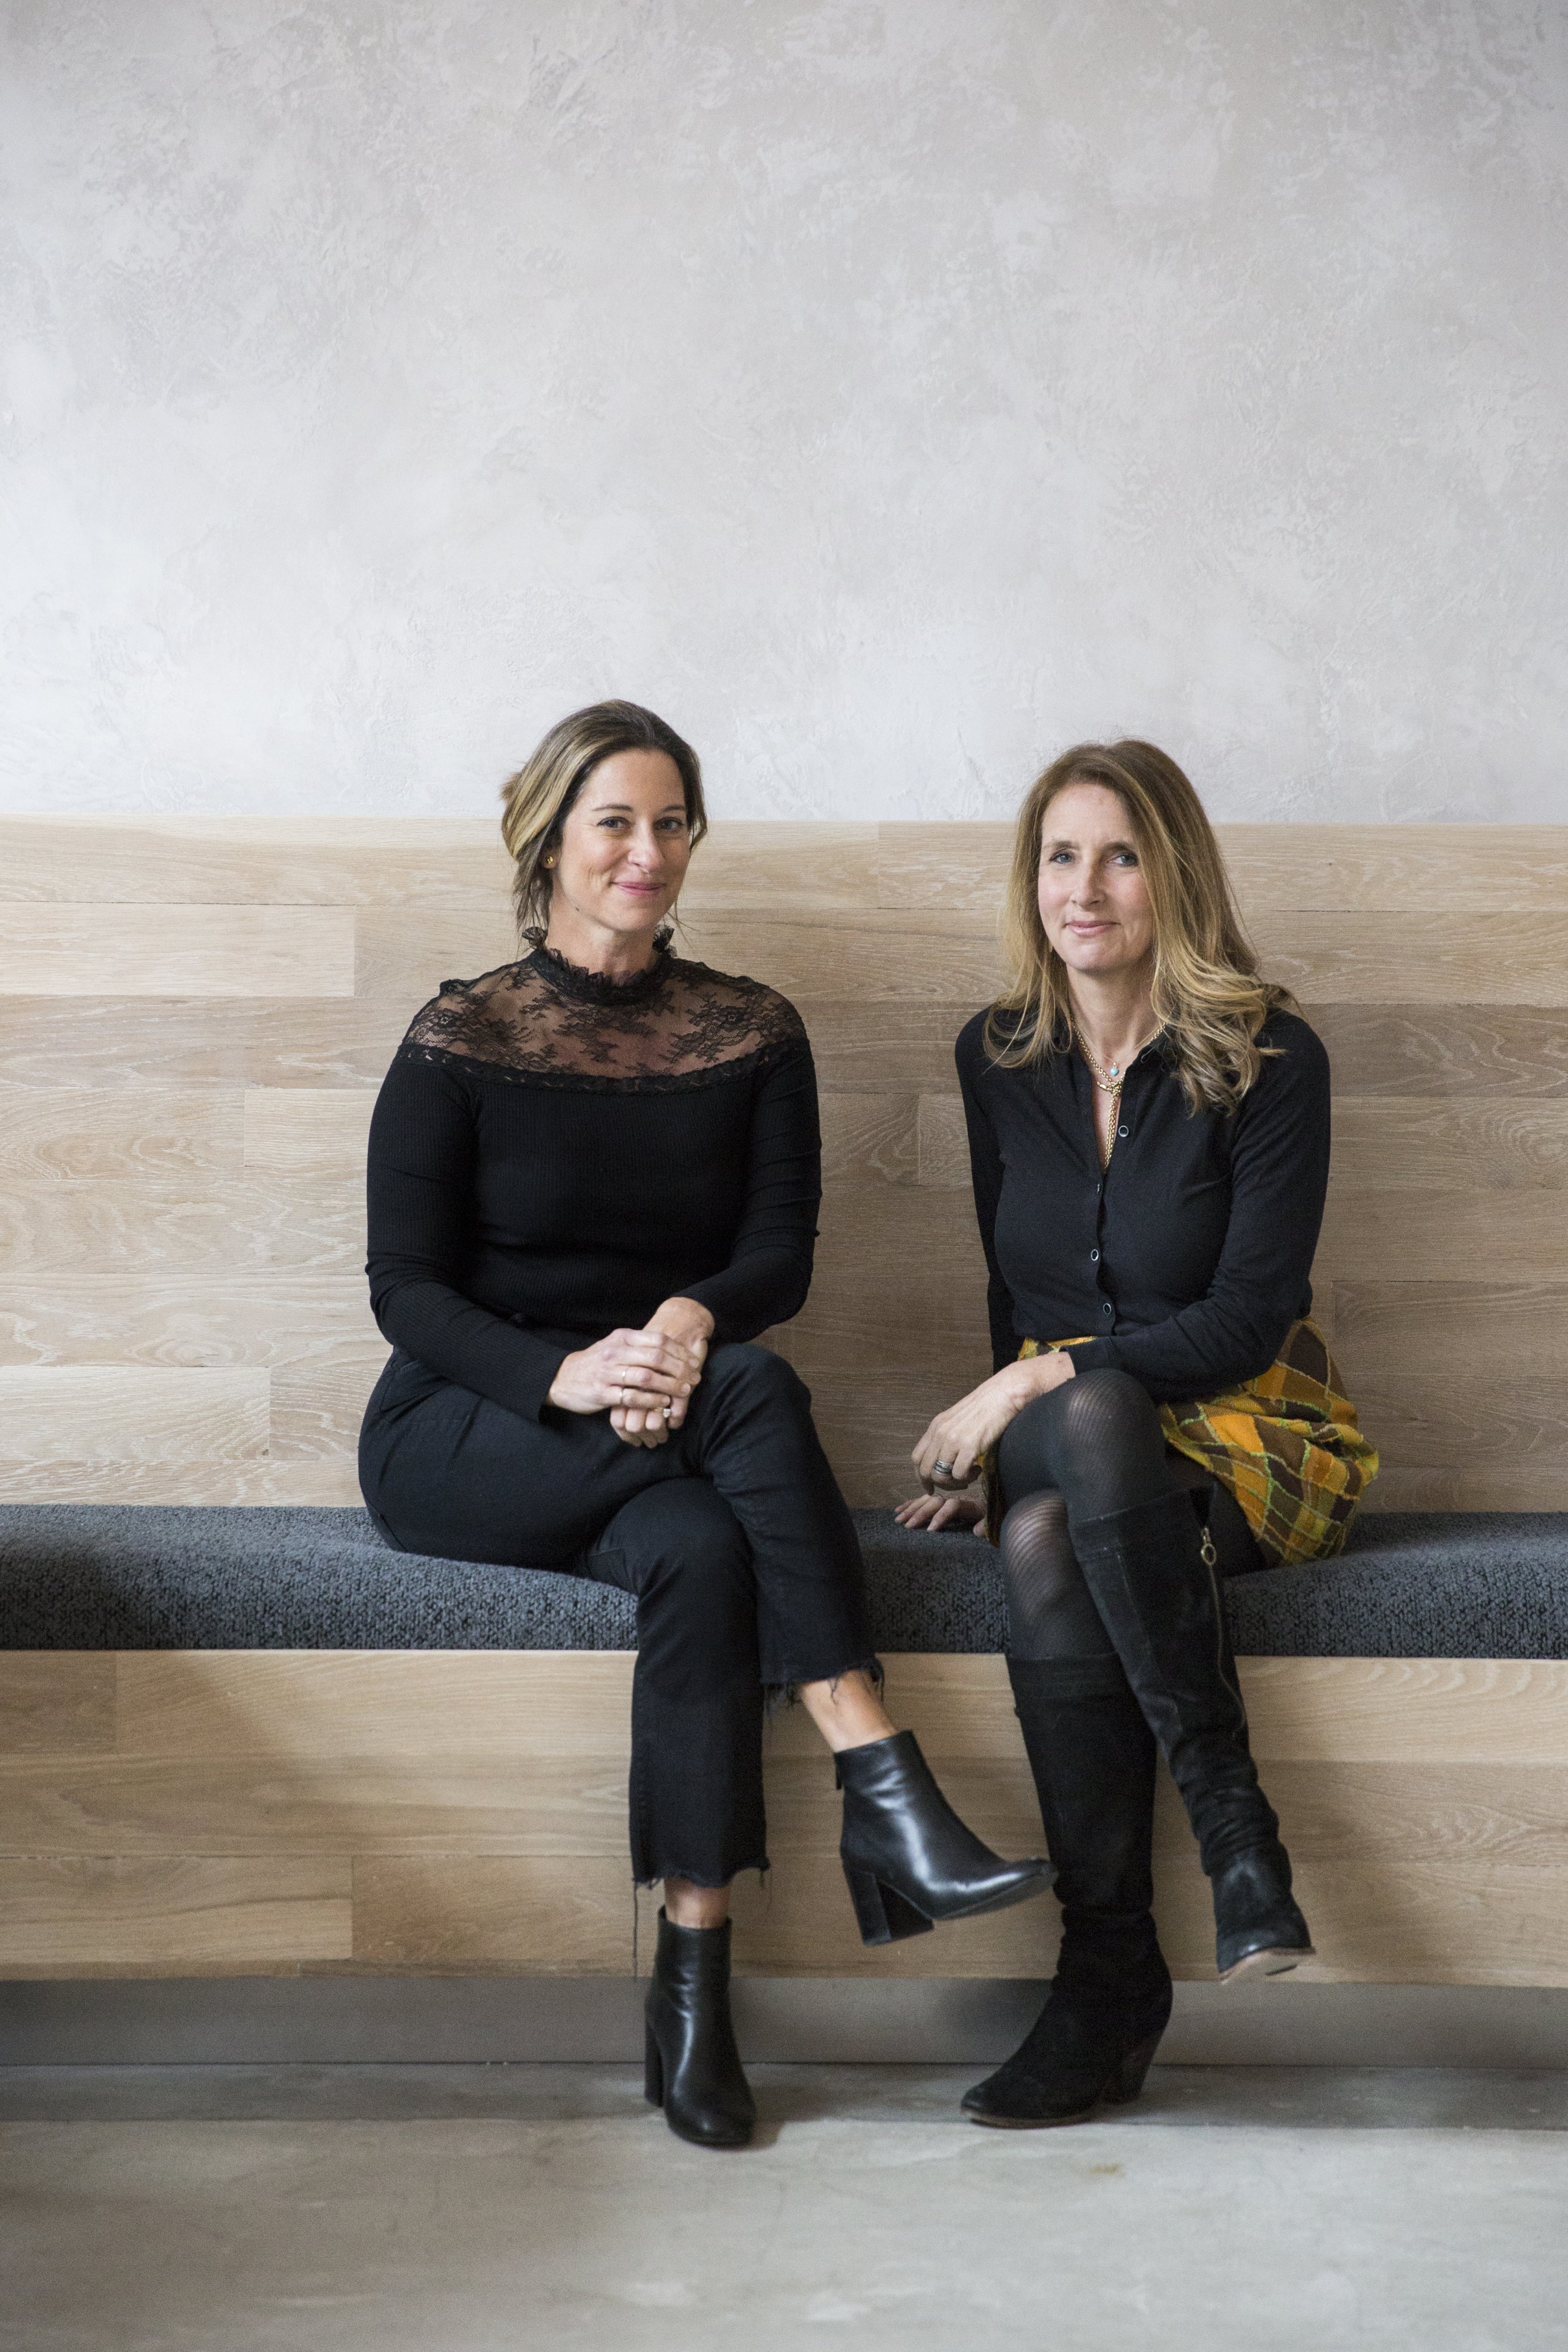 Chaia owners Suzanne Simon (left) and Bettina Stern. Photograph by Jennifer Chase